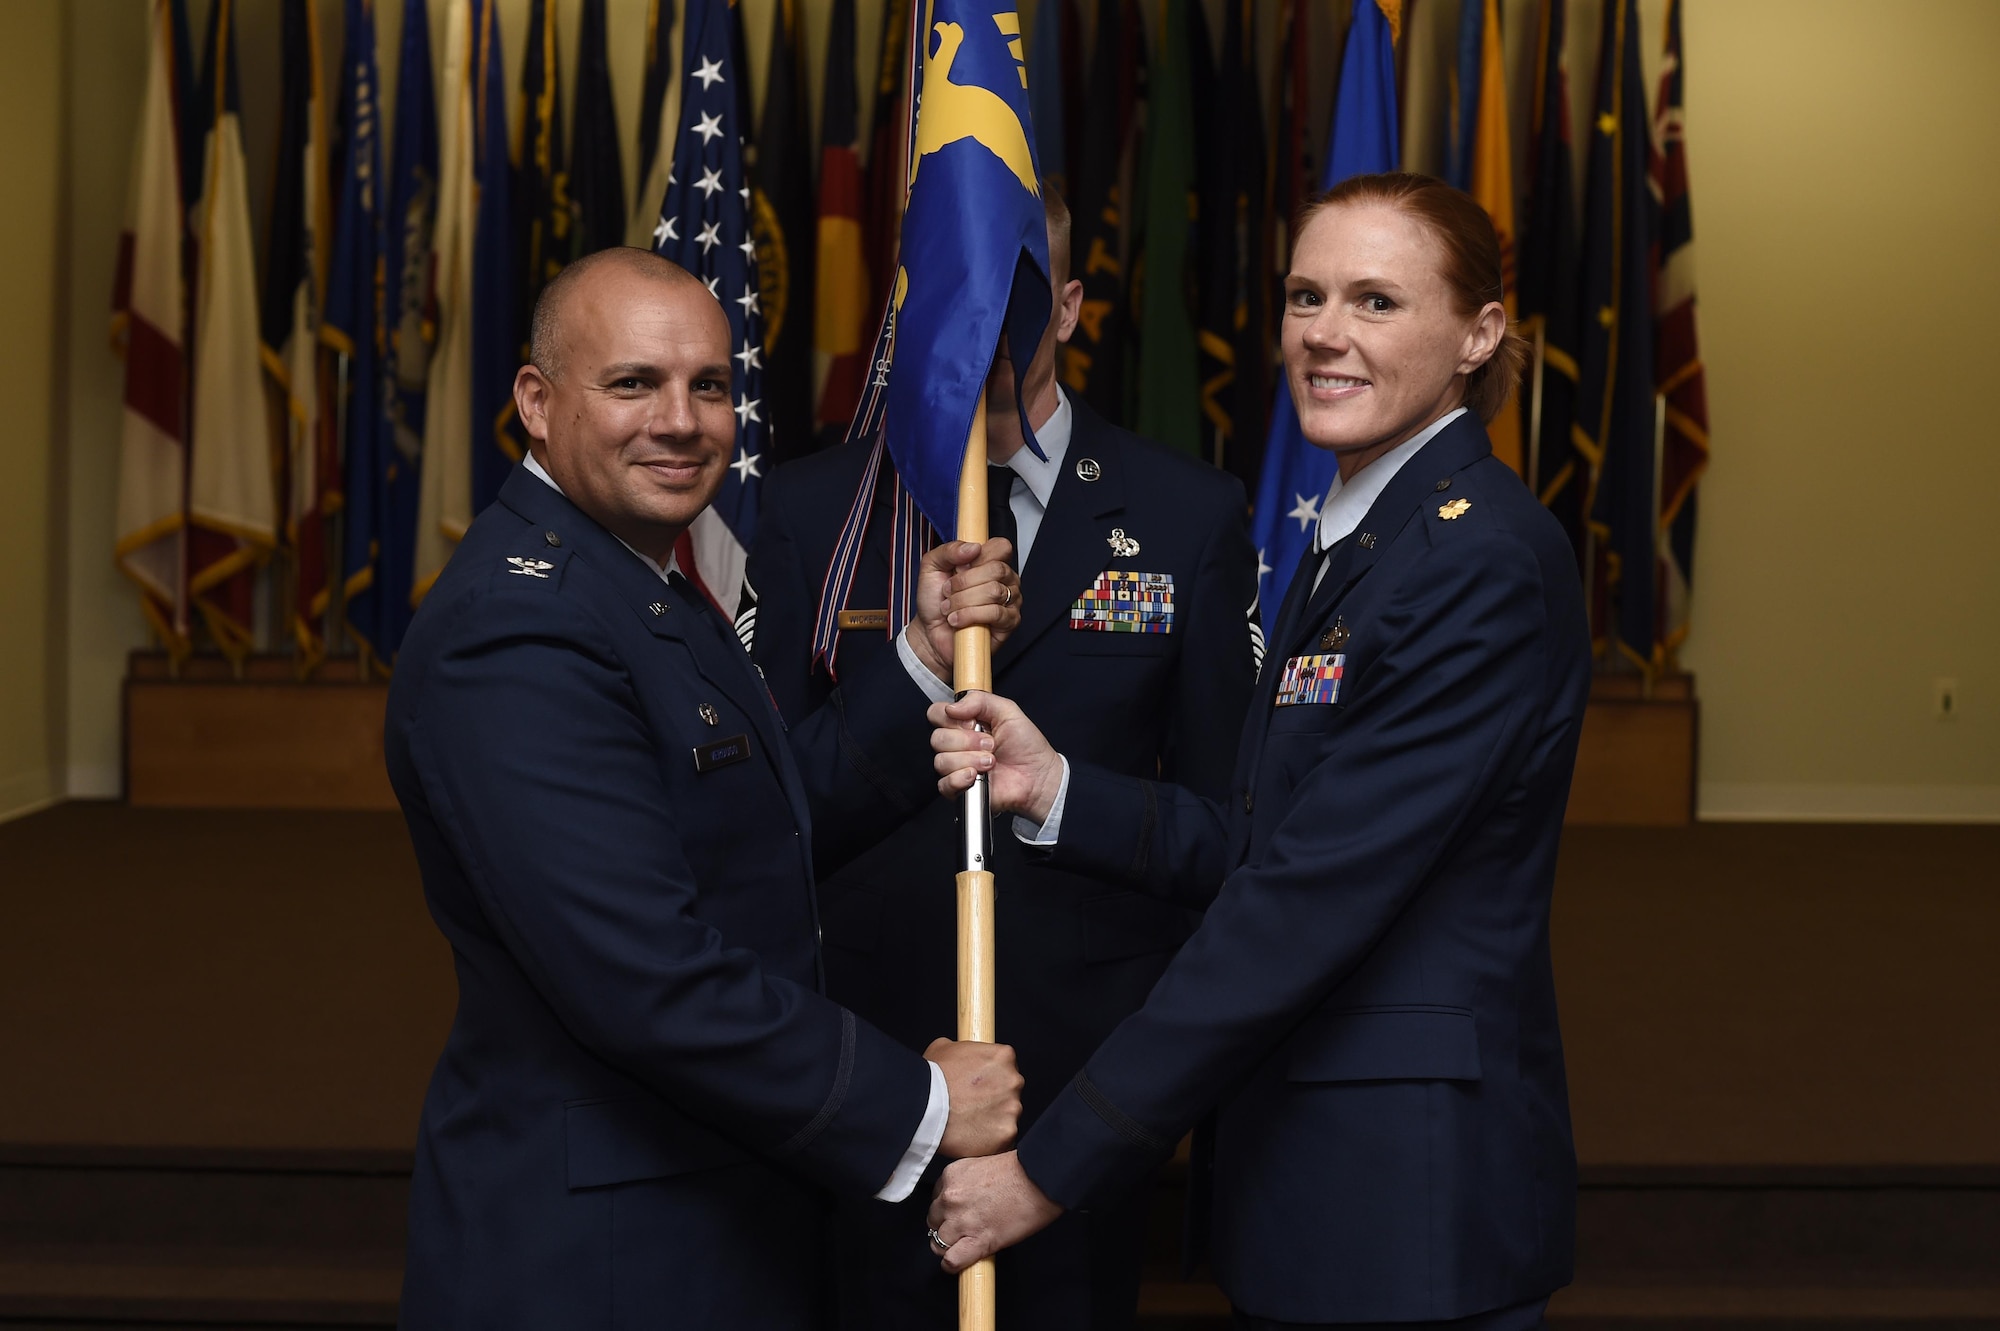 Col. Frank Verdugo, 90th Mission Support Group Commander, passes the guidon to Maj. Shannon Hughes, 90th Force Support Squadron commander, during the 90th FSS change-of-command ceremony at F.E. Warren Air Force Base, Wyo., July 15, 2016. The ceremony signified the transition of command from Lt. Col. David Olinger. (U.S. Air Force photo by Staff Sgt. Christopher Ruano)